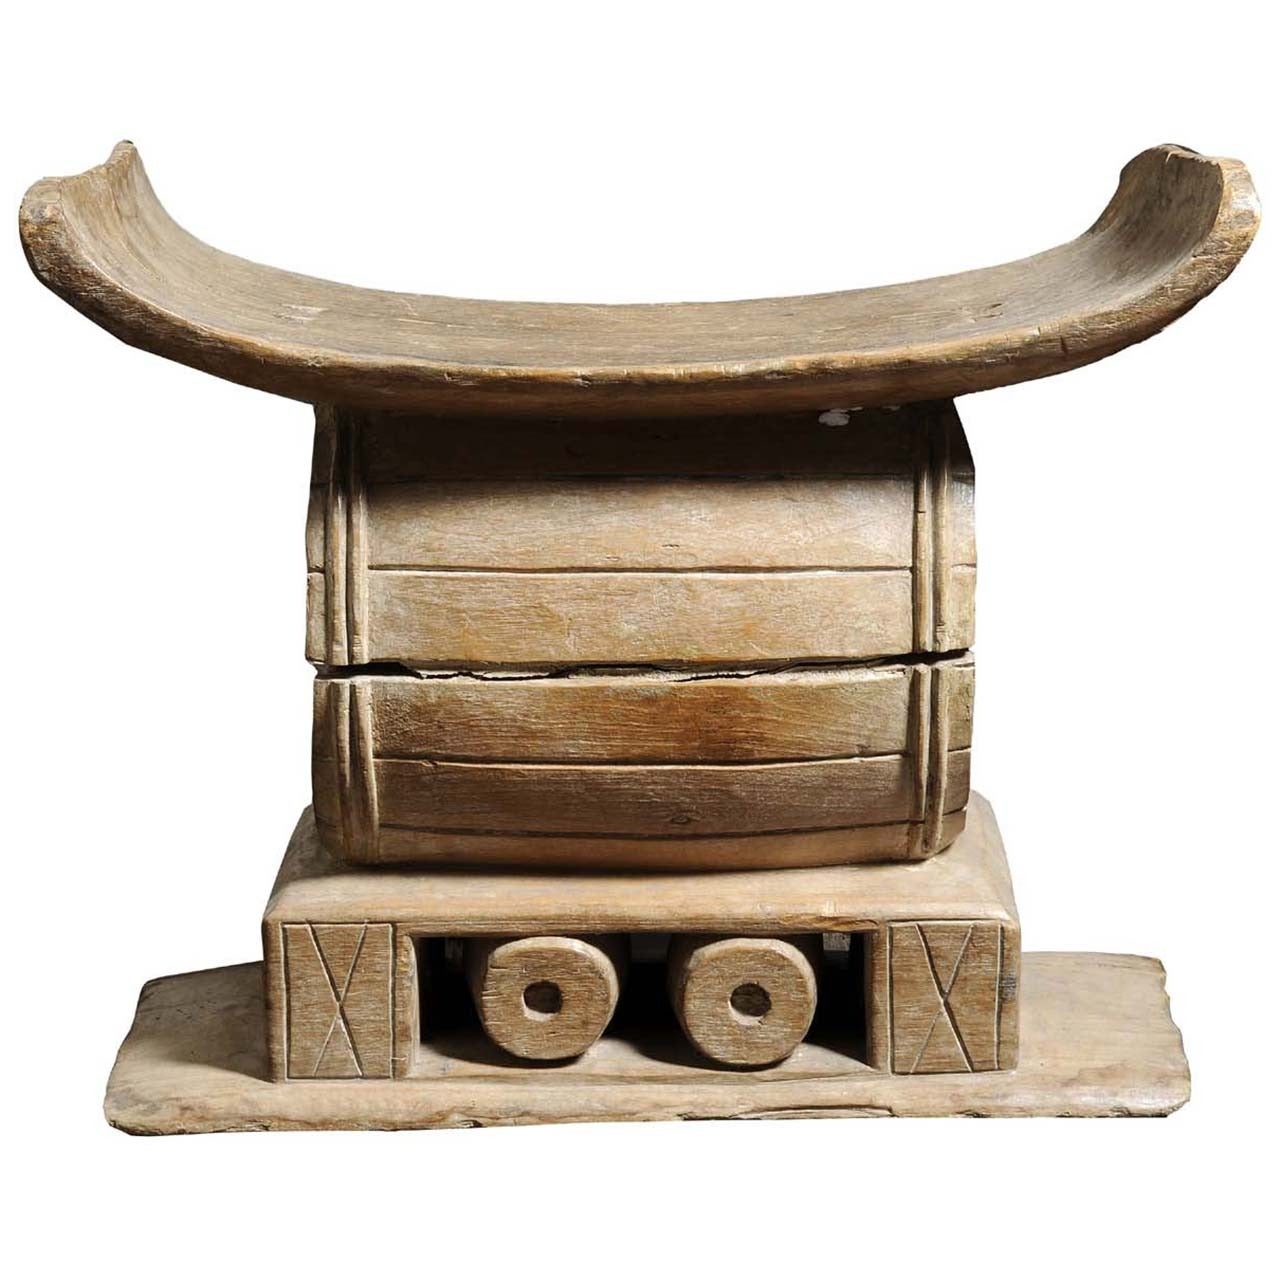 Carved wood chair - Ca 1900 - Ghana For Sale